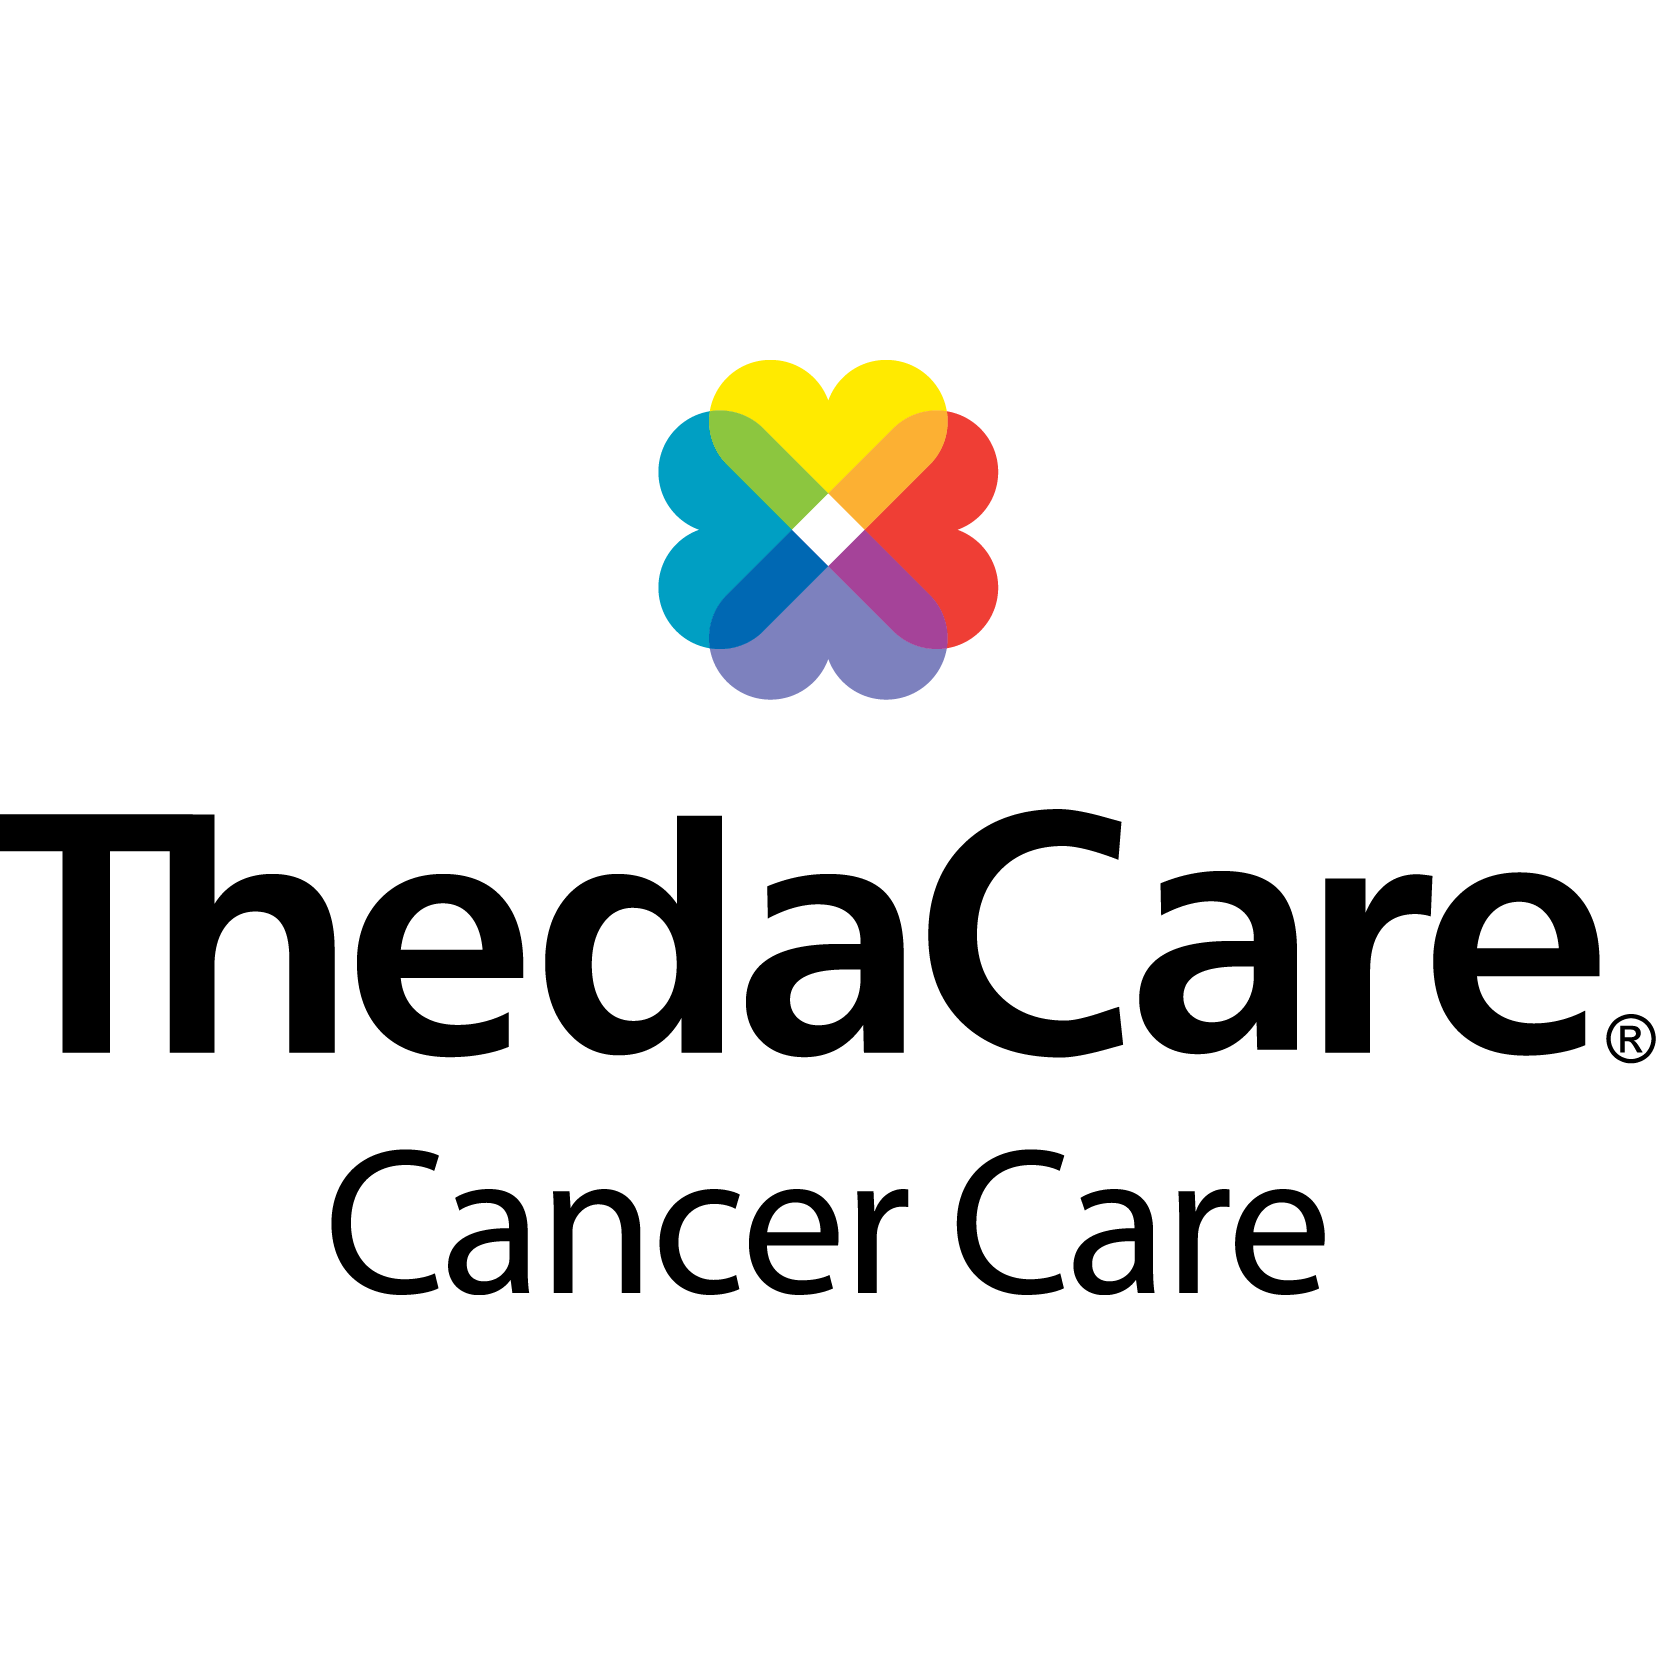 ThedaCare Cancer Care